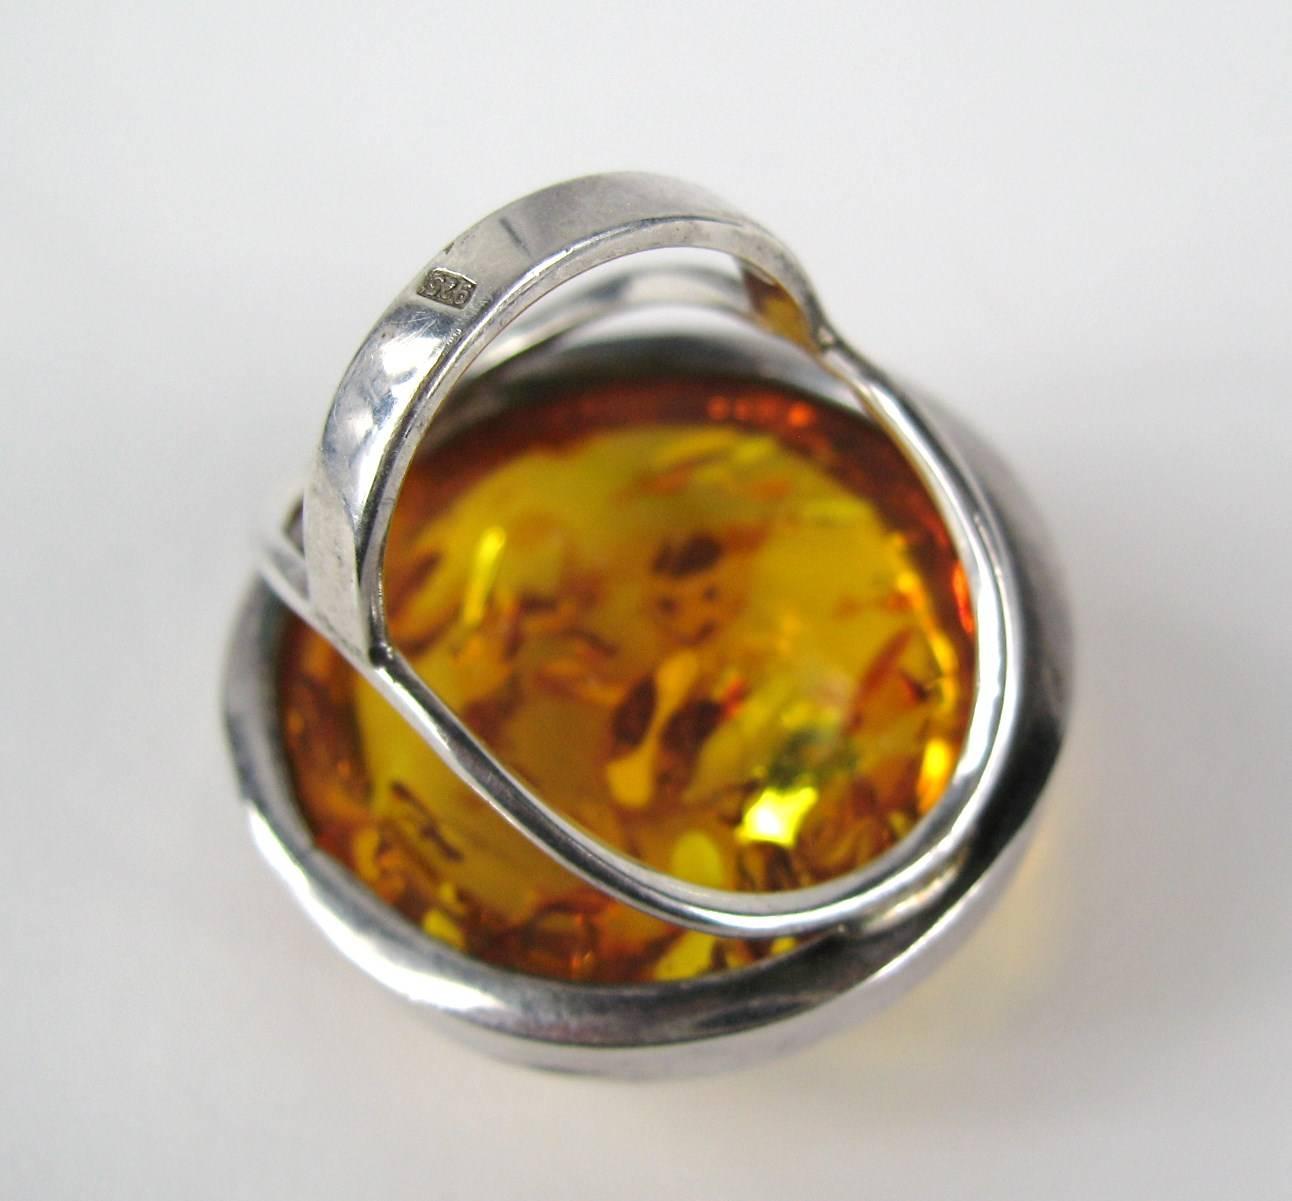 Oversized Round Baltic Amber Sterling Silver Ring  In Excellent Condition For Sale In Wallkill, NY